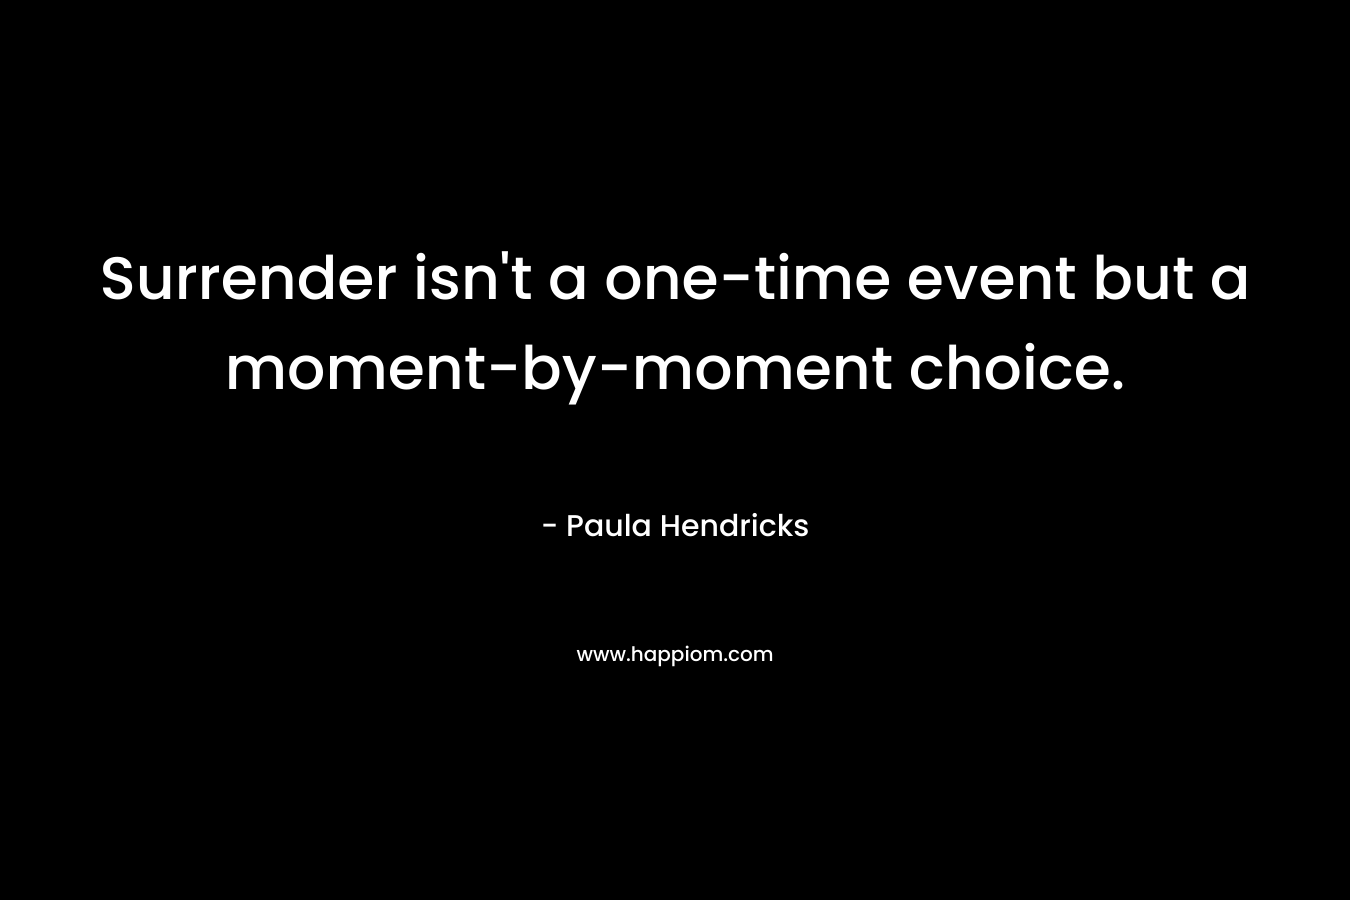 Surrender isn't a one-time event but a moment-by-moment choice.